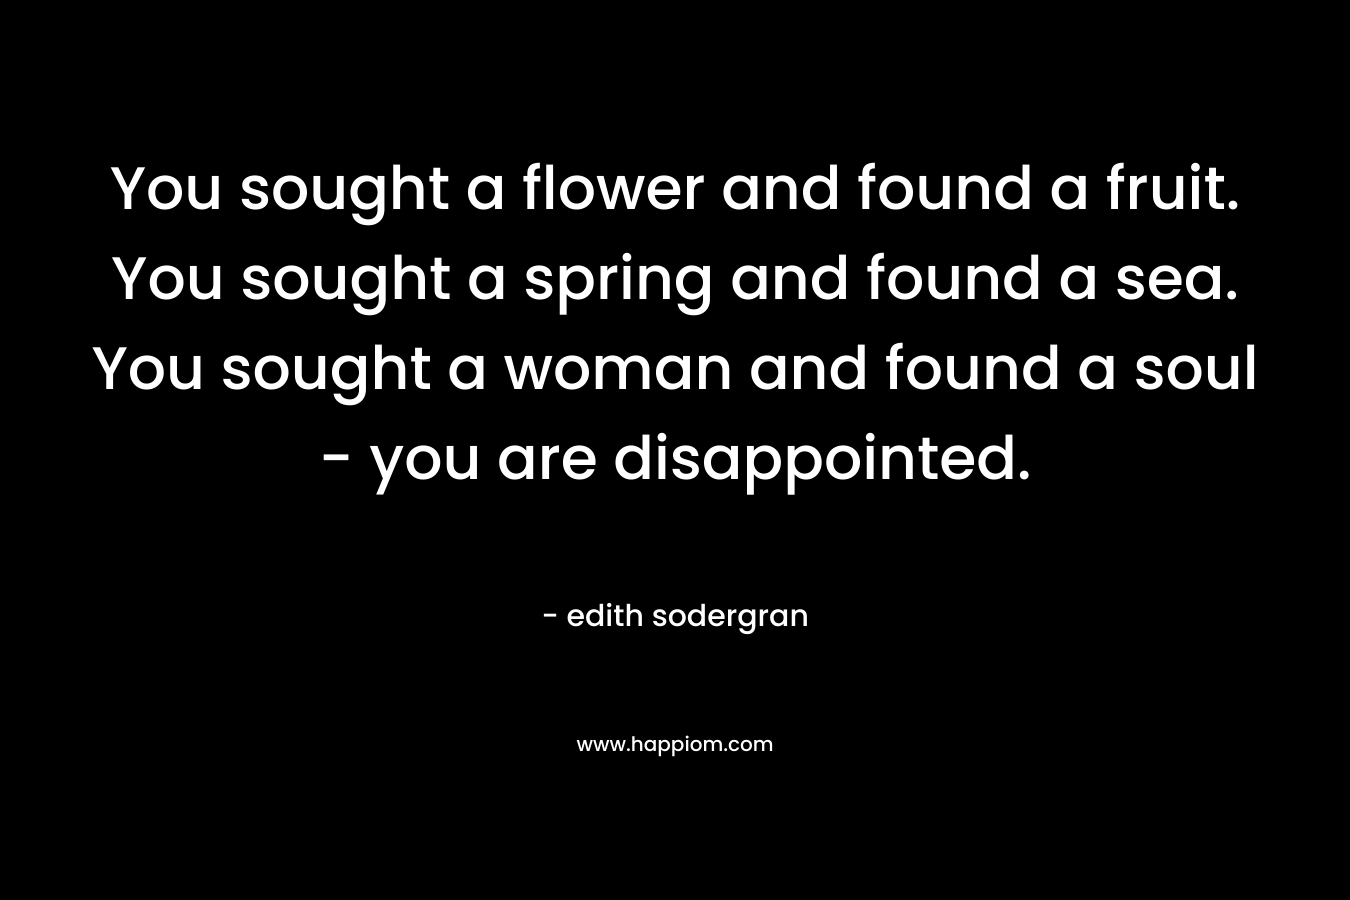 You sought a flower and found a fruit. You sought a spring and found a sea. You sought a woman and found a soul - you are disappointed.